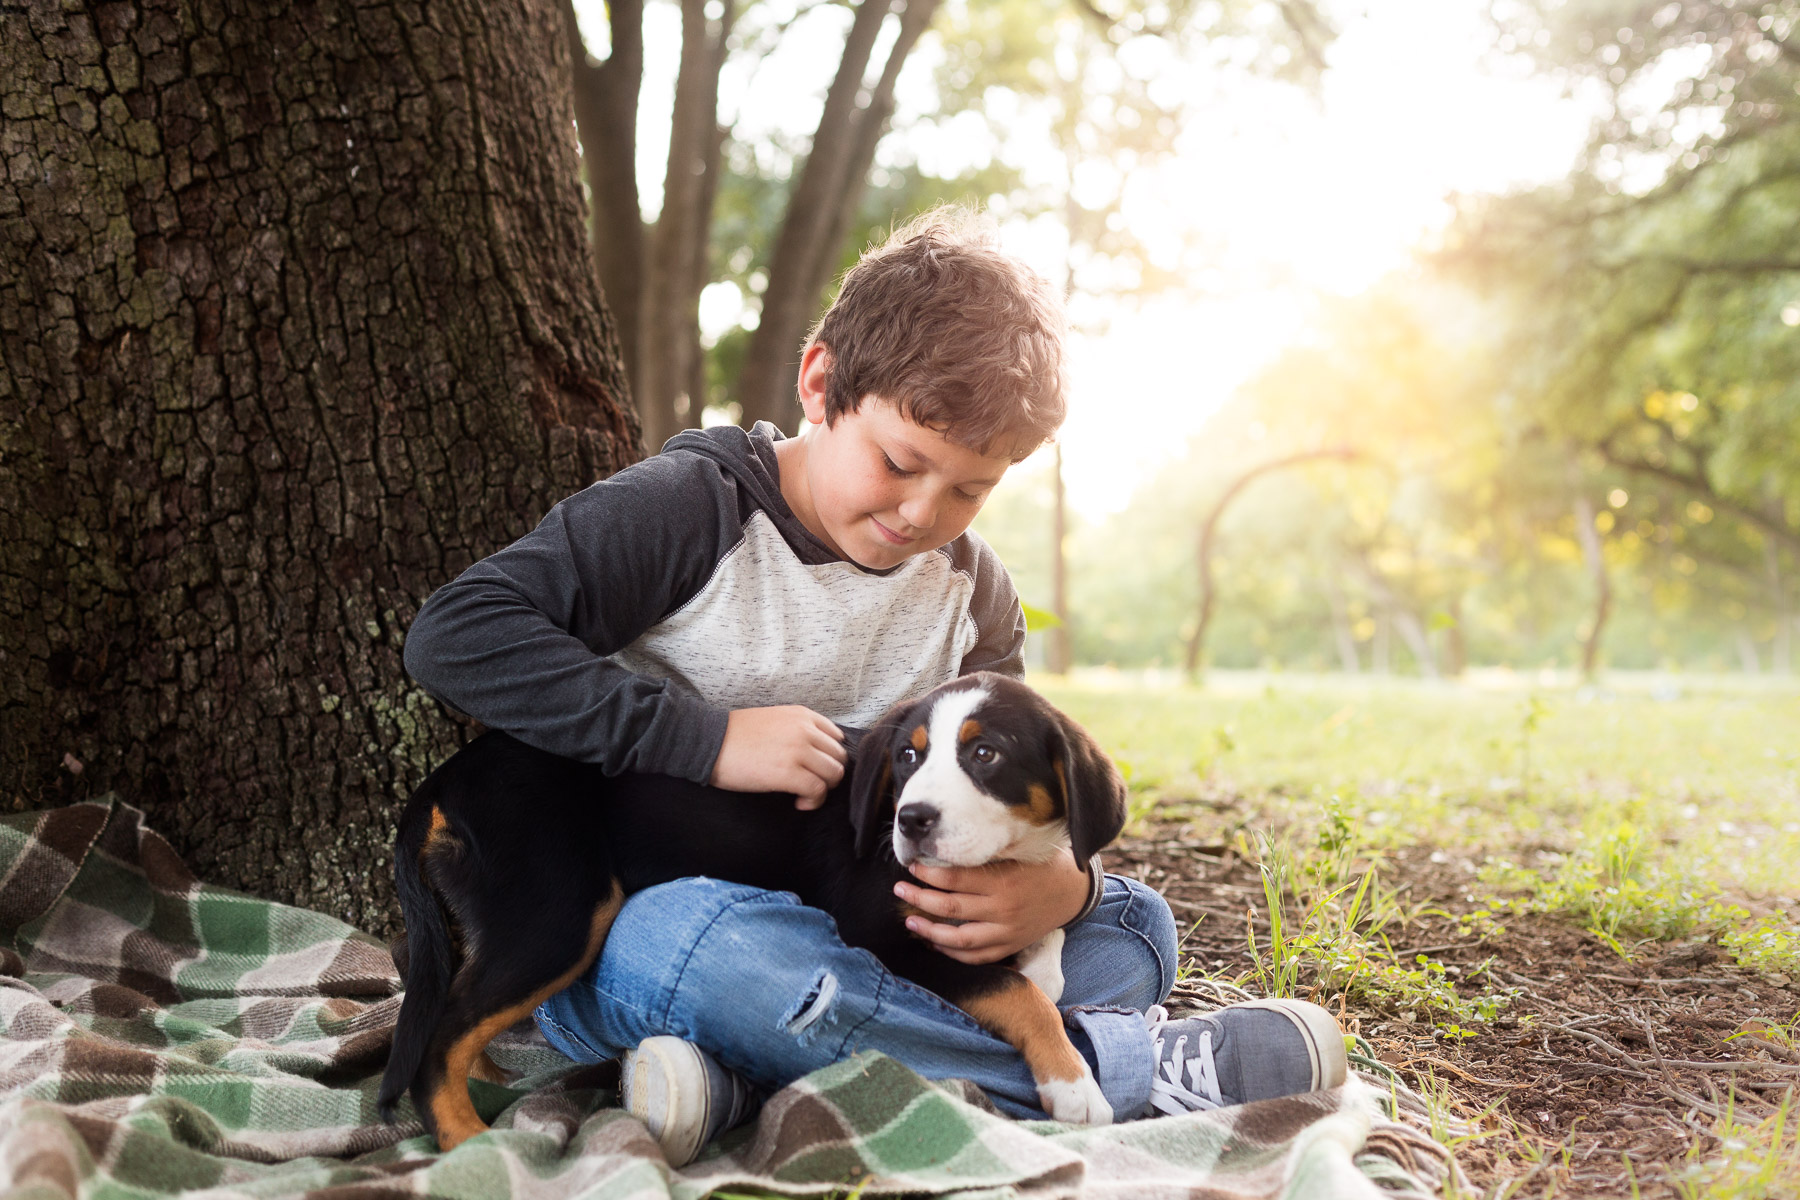 dog-swiss-bernese-puppu-with-boy-kid-together-forest-at-sunset.jpg